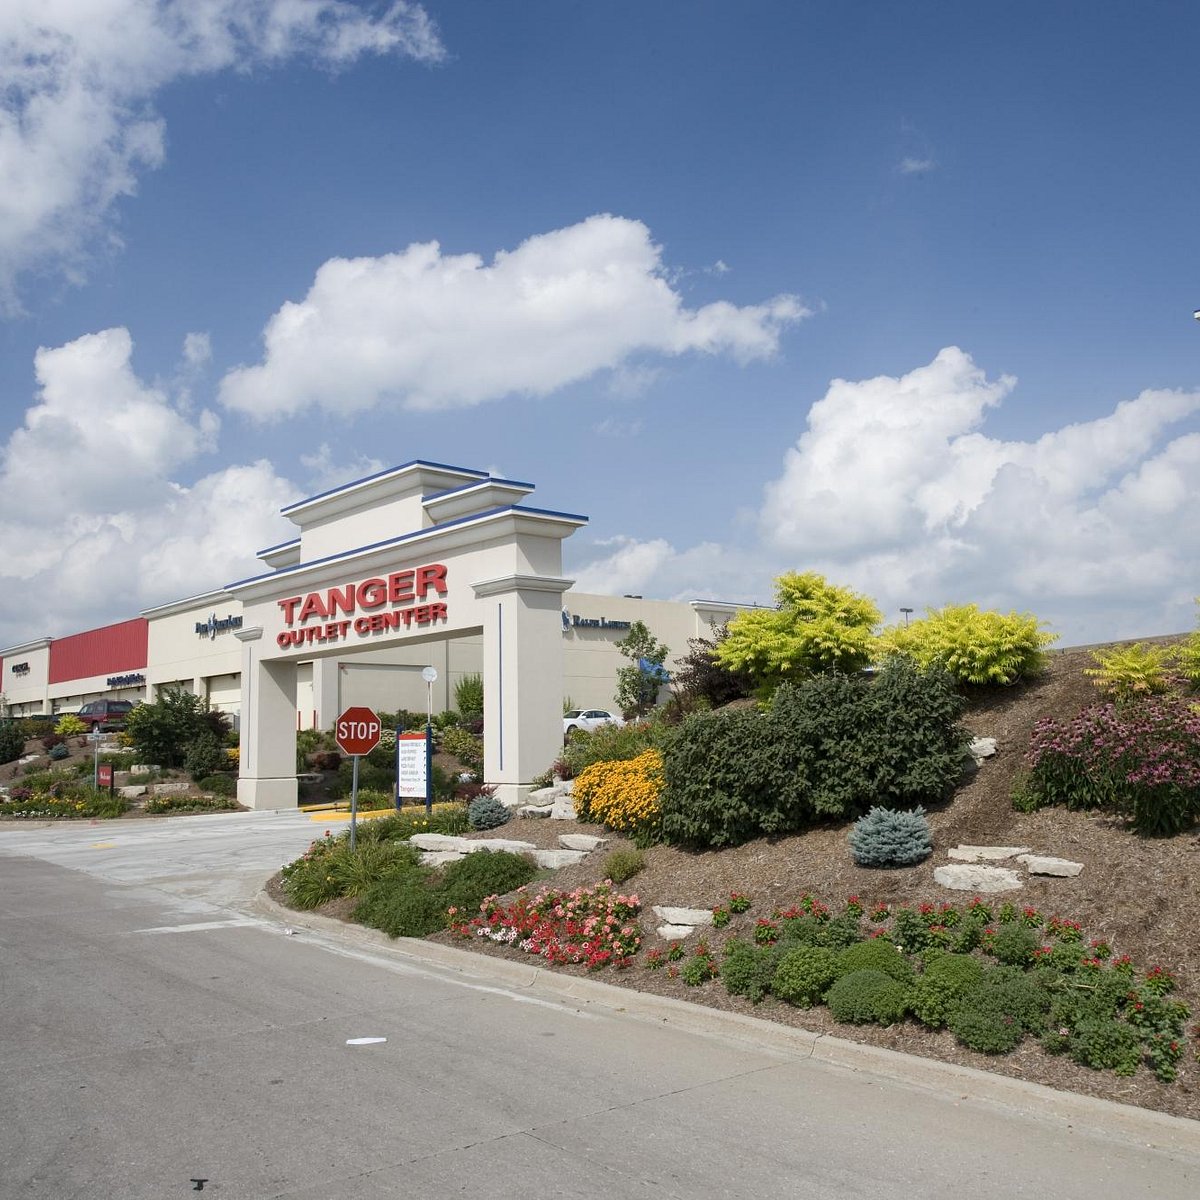 Tanger Outlets, Branson - Here's an uplifting offer from